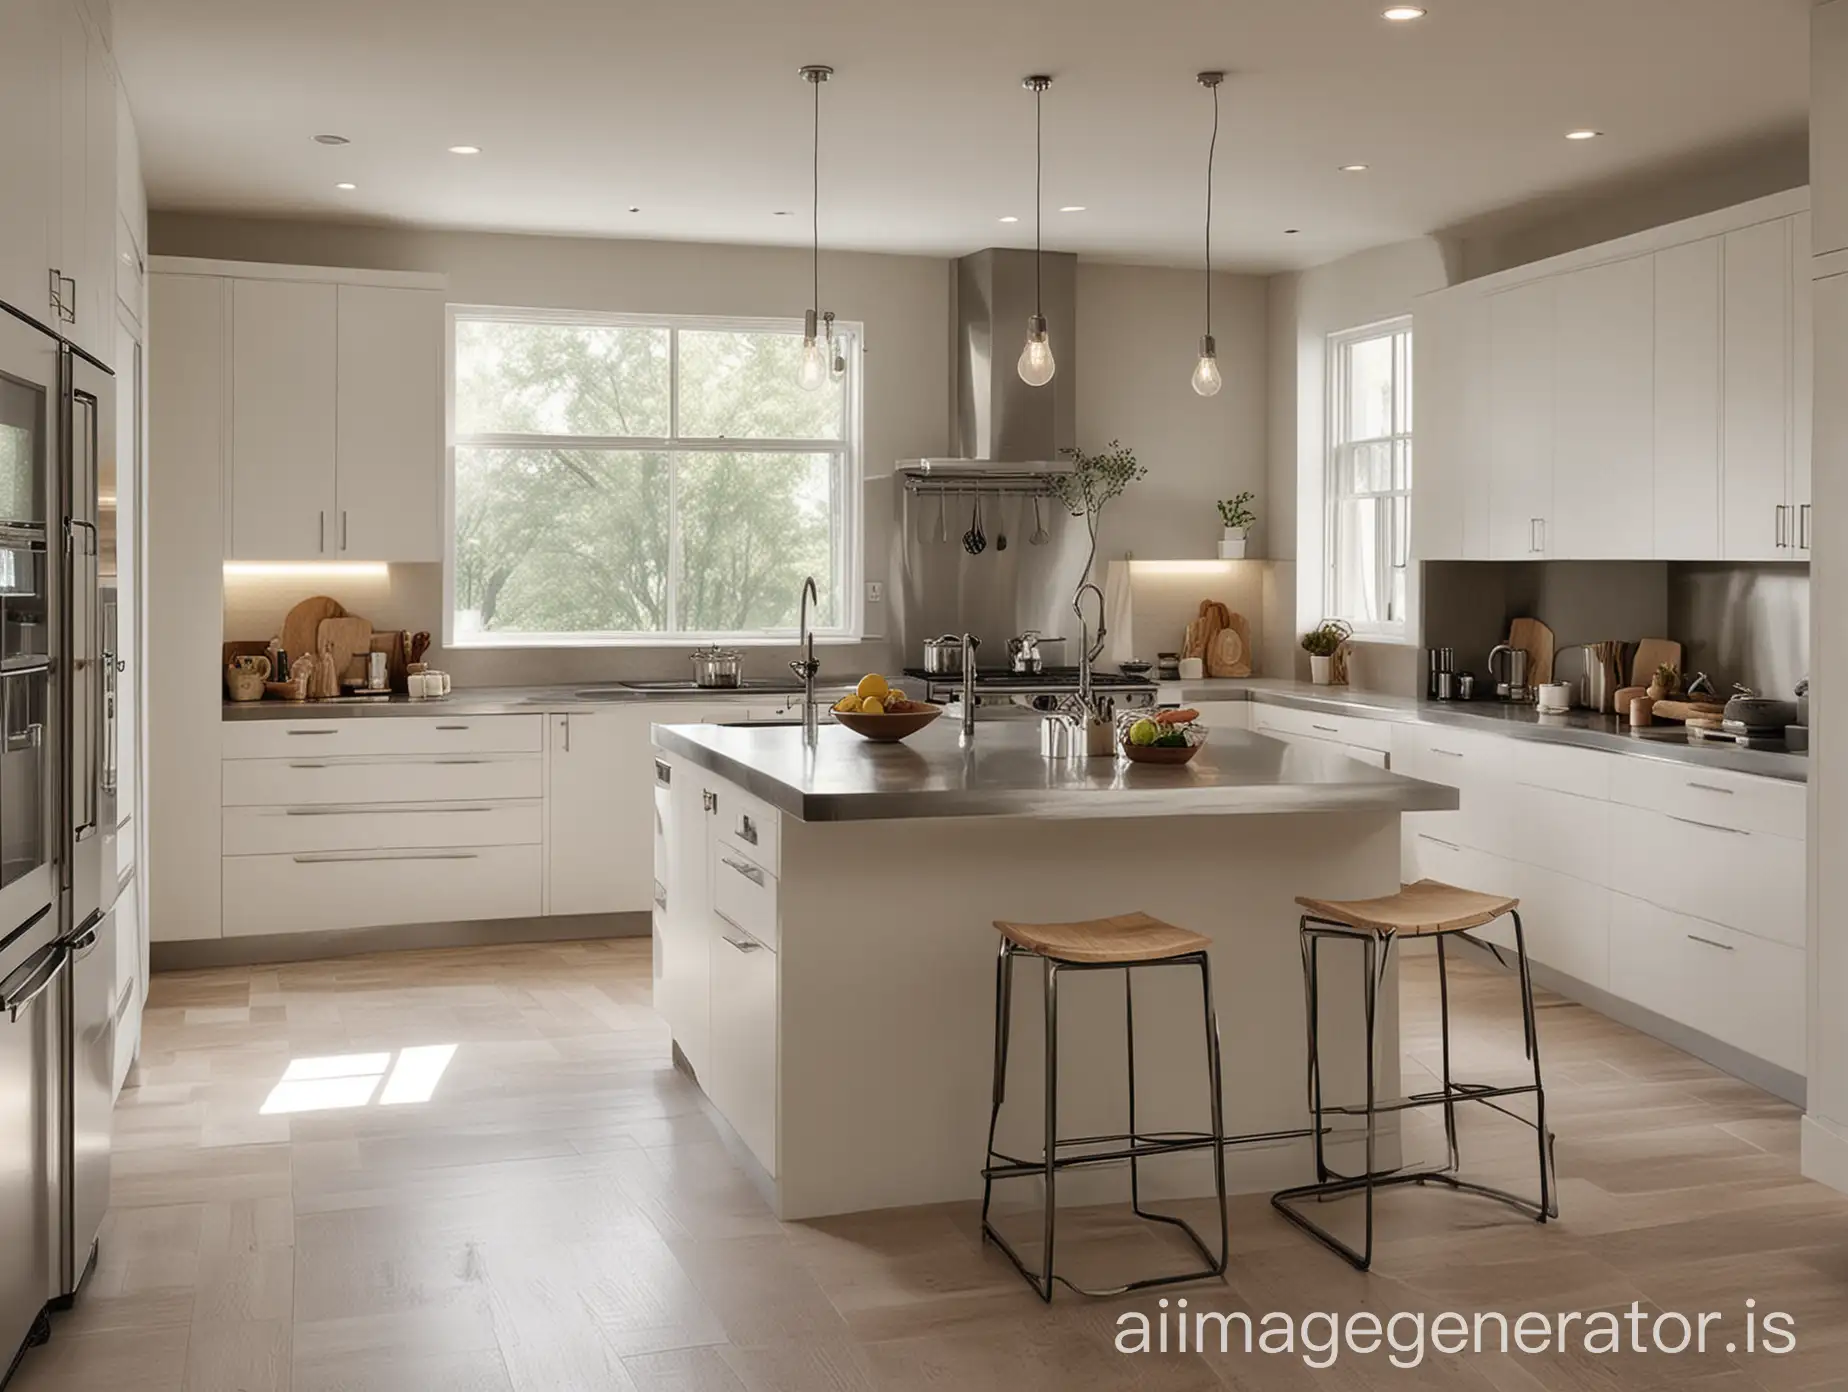 Generate an image of a classic modern minimalist kitchen set interior. The kitchen should have clean lines, simple yet elegant furniture, and a neutral color palette. Incorporate elements such as stainless steel appliances, sleek countertops, minimalistic cabinets, and subtle lighting. The overall ambiance should exude sophistication and functionality while embracing the principles of minimalism